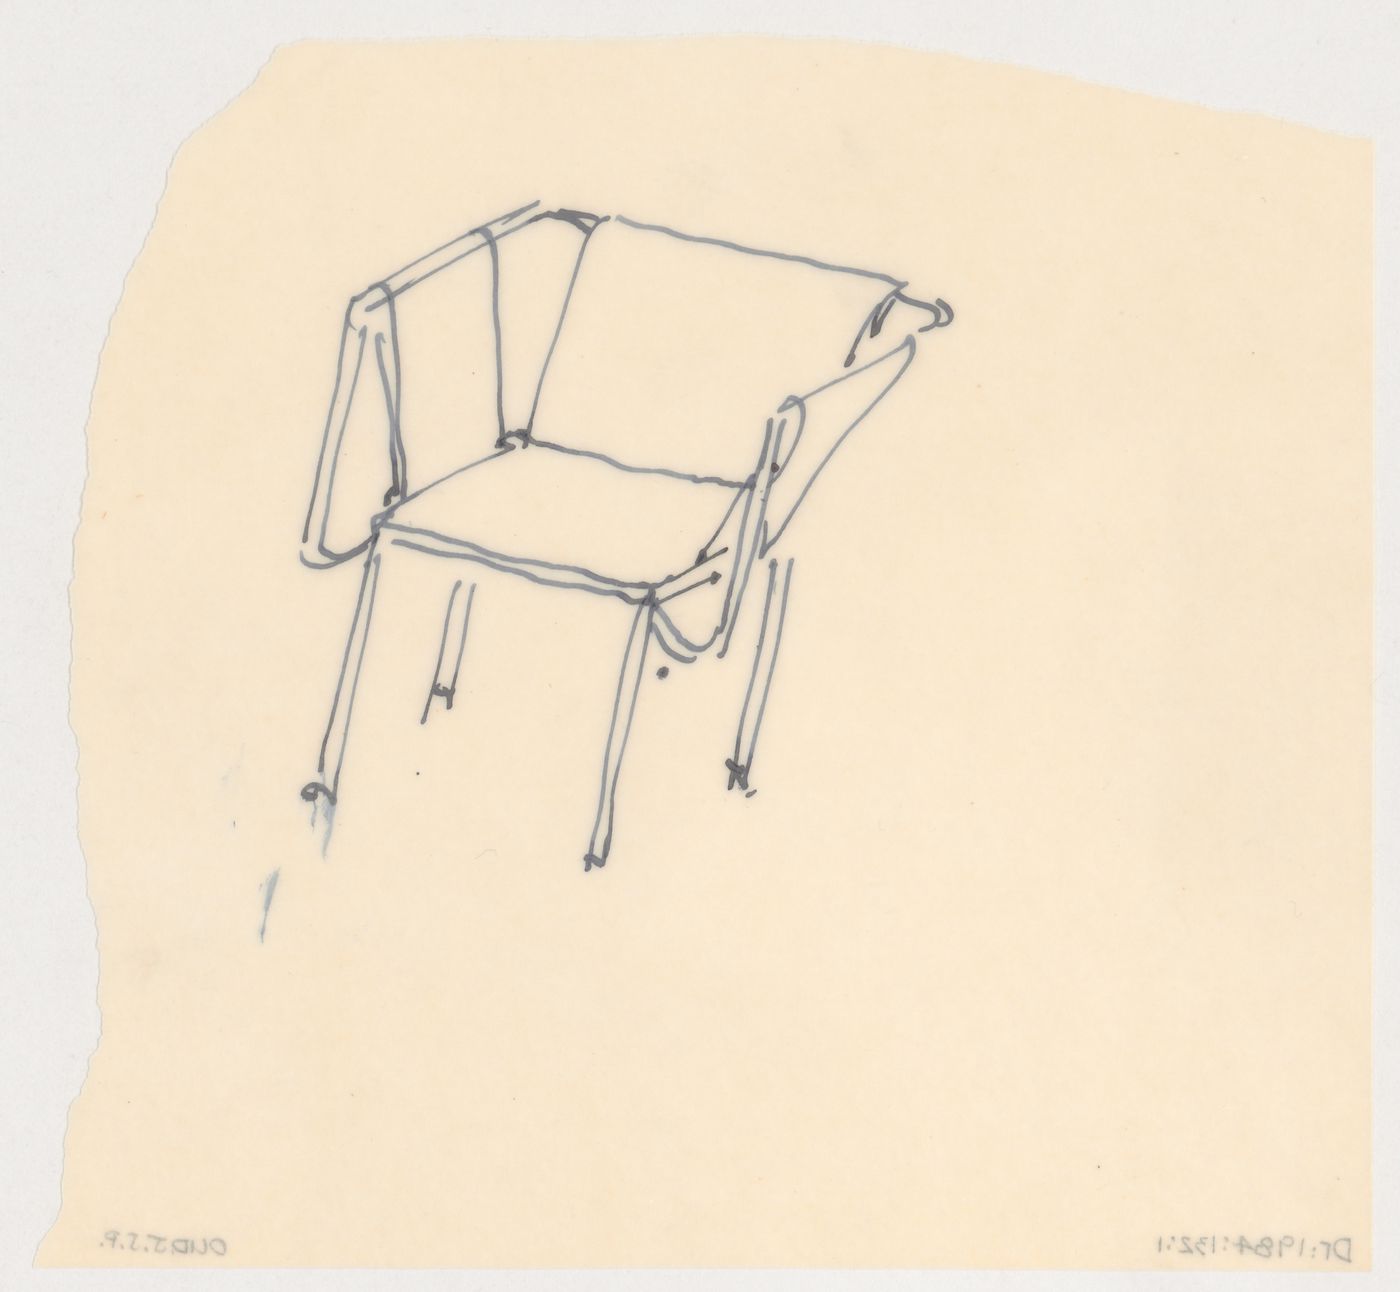 Sketch perspective for a chair, possibly for Metz & Co., Amsterdam, Netherlands